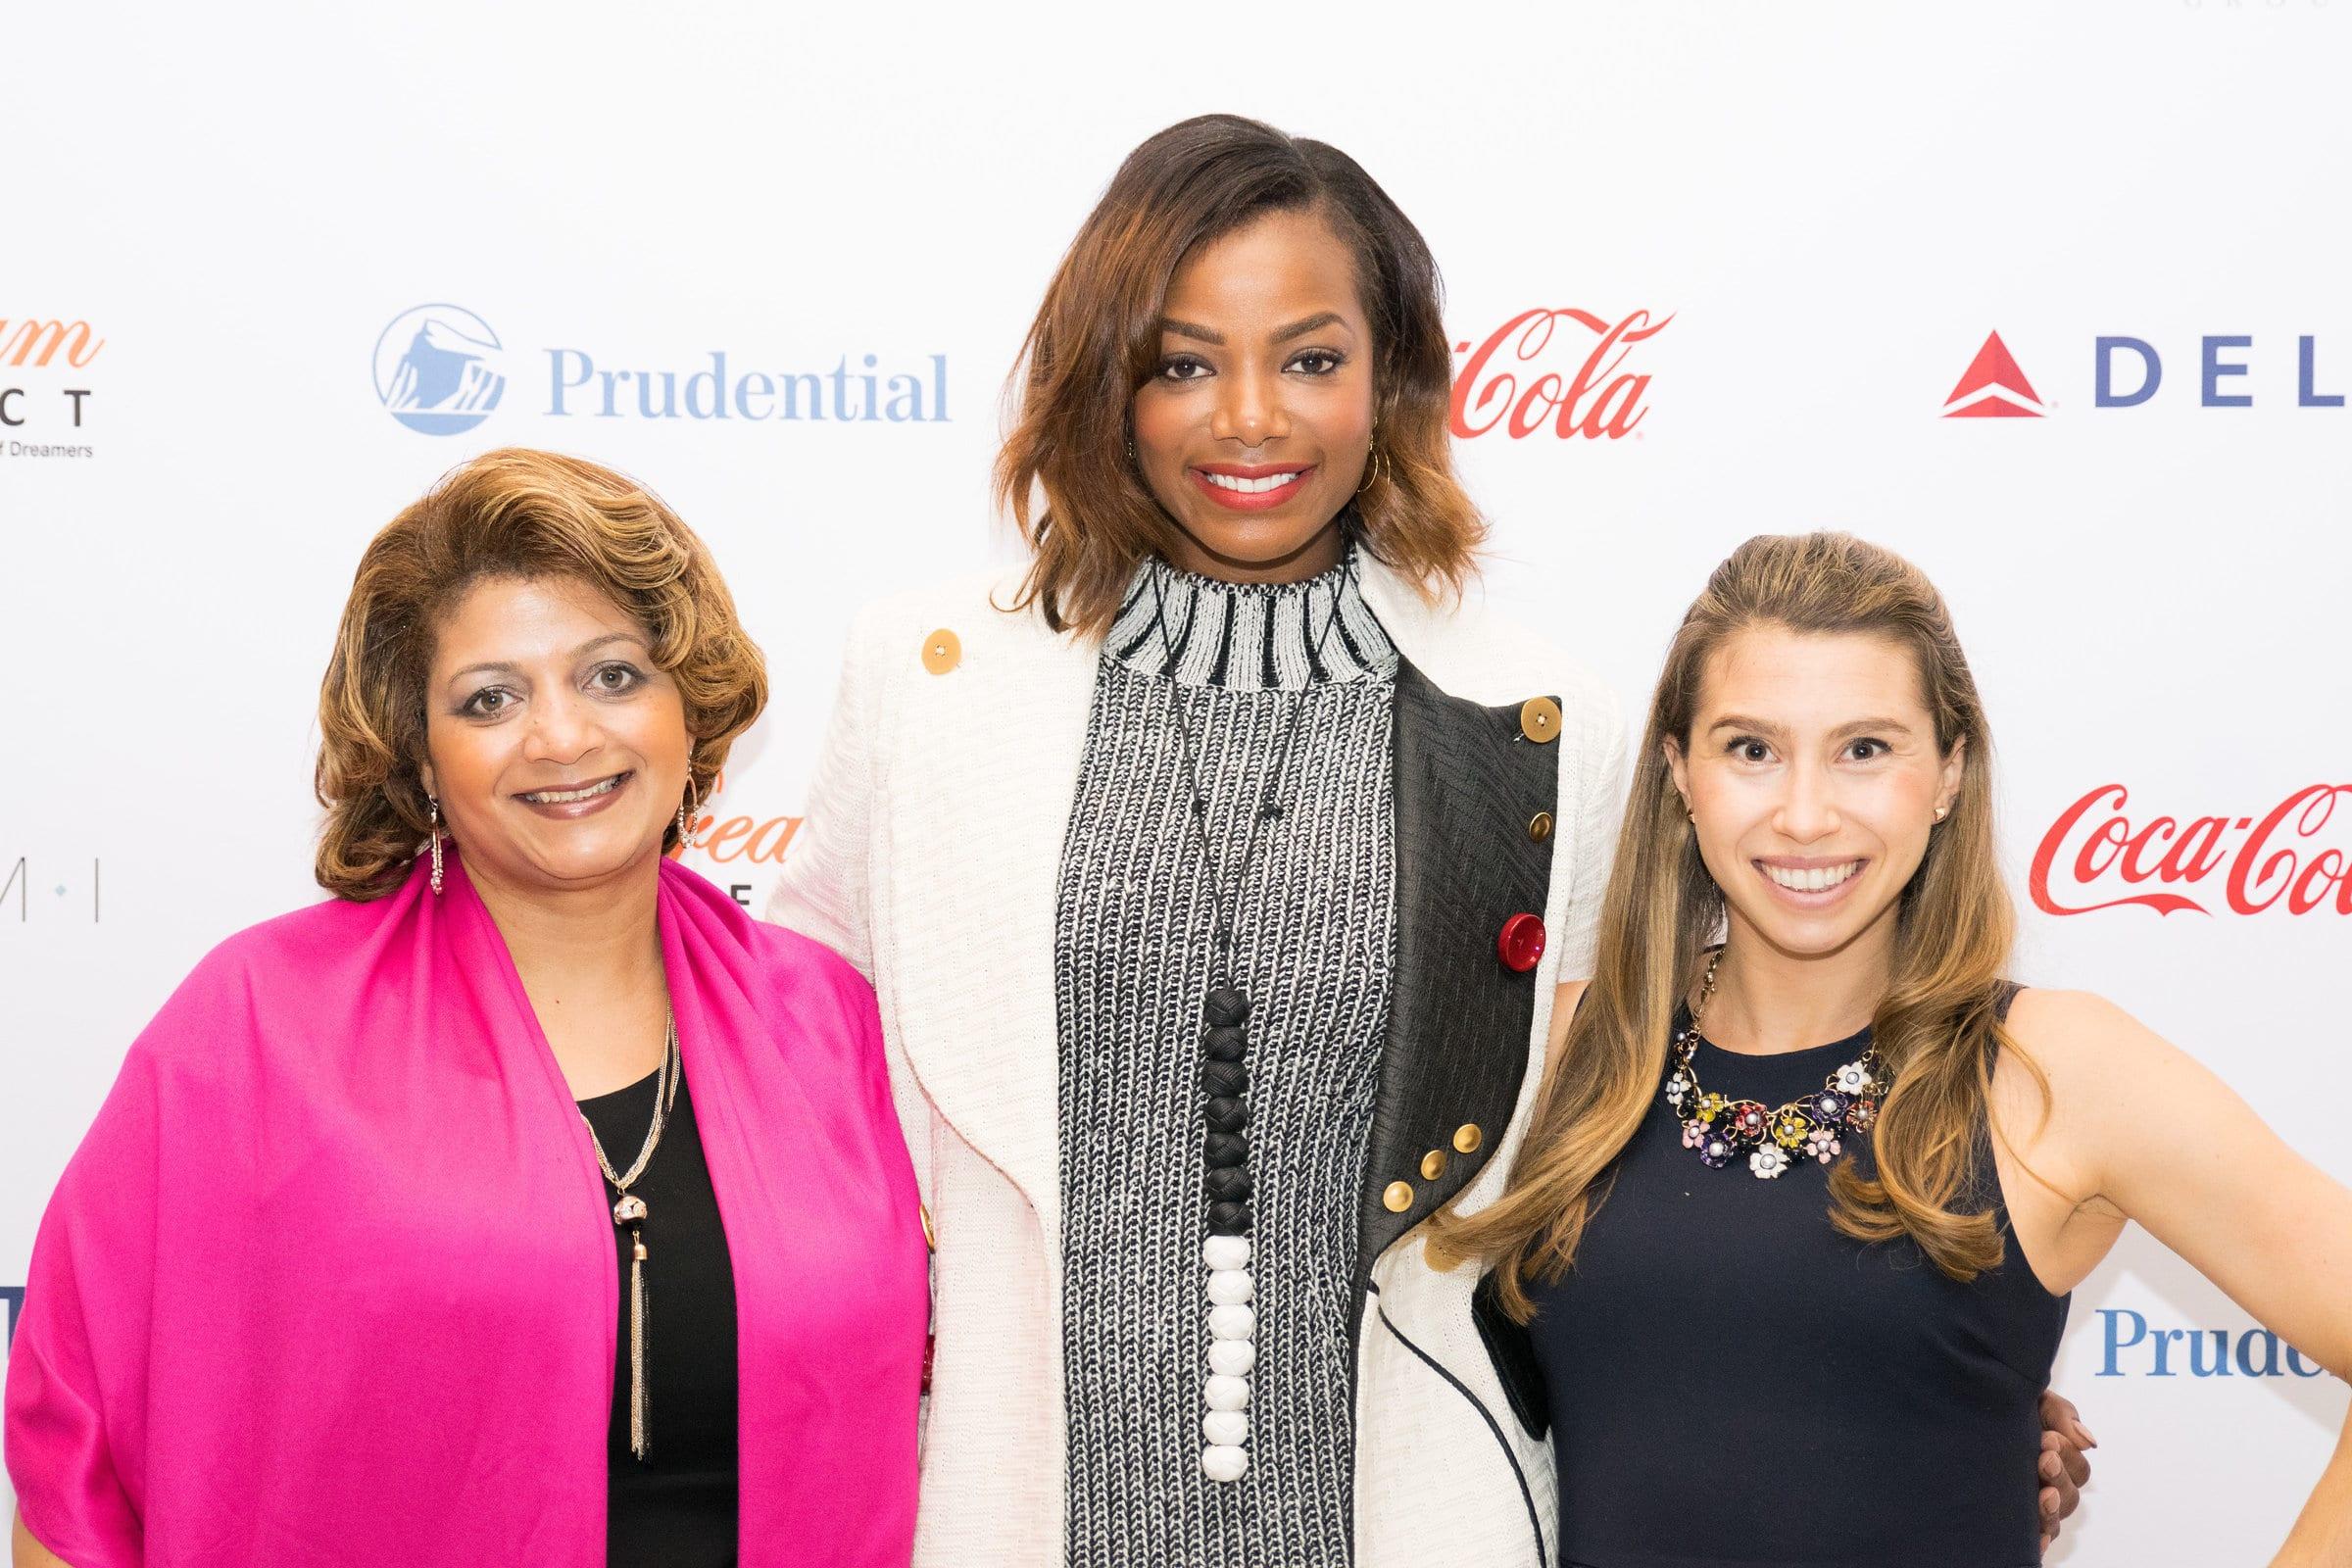 Left to Right: Dorinda Walker (VP of Consumer Strategy, Prudential Financial), Tai Beauchamp (CEO of Tai Life Media), Jennifer Fleiss (Co-Founder, Rent The Runway) at the 2016 Dream Project Symposium (photo credit: Jasmine Alston)